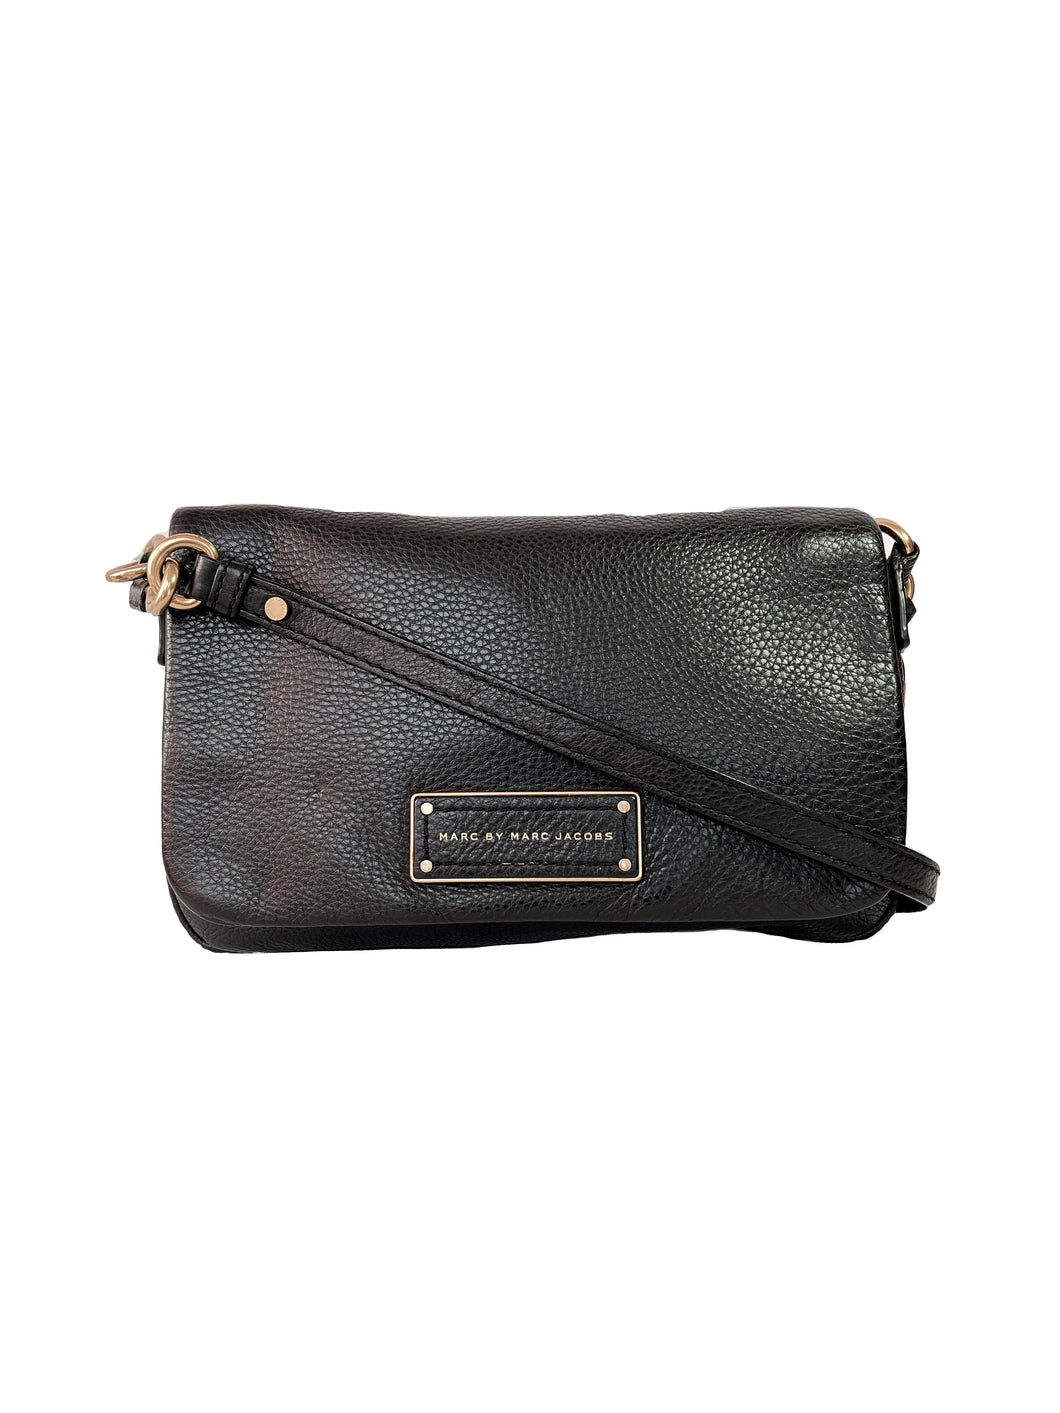 Marc by Marc Jacobs black leather crossbody